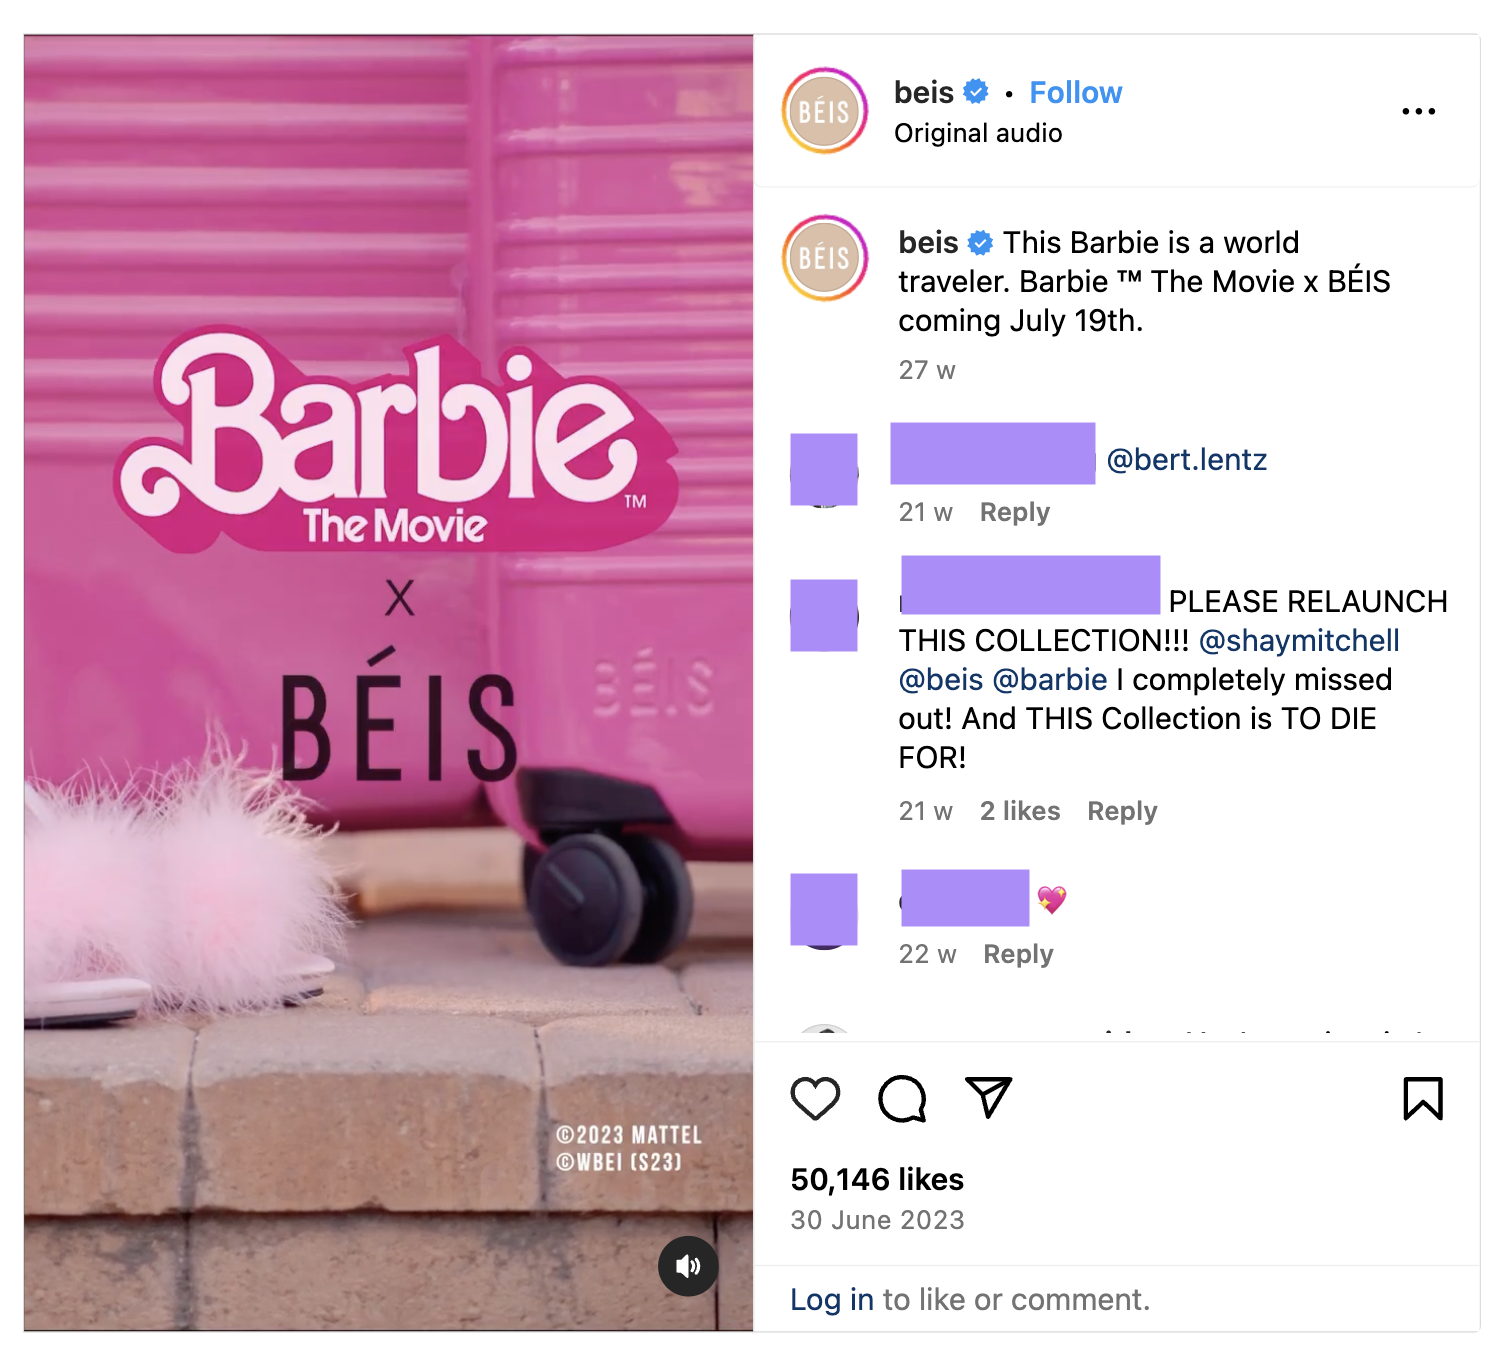 Post from Beis promoting their Barbie ™ The Movie x BÉIS luggage collection.